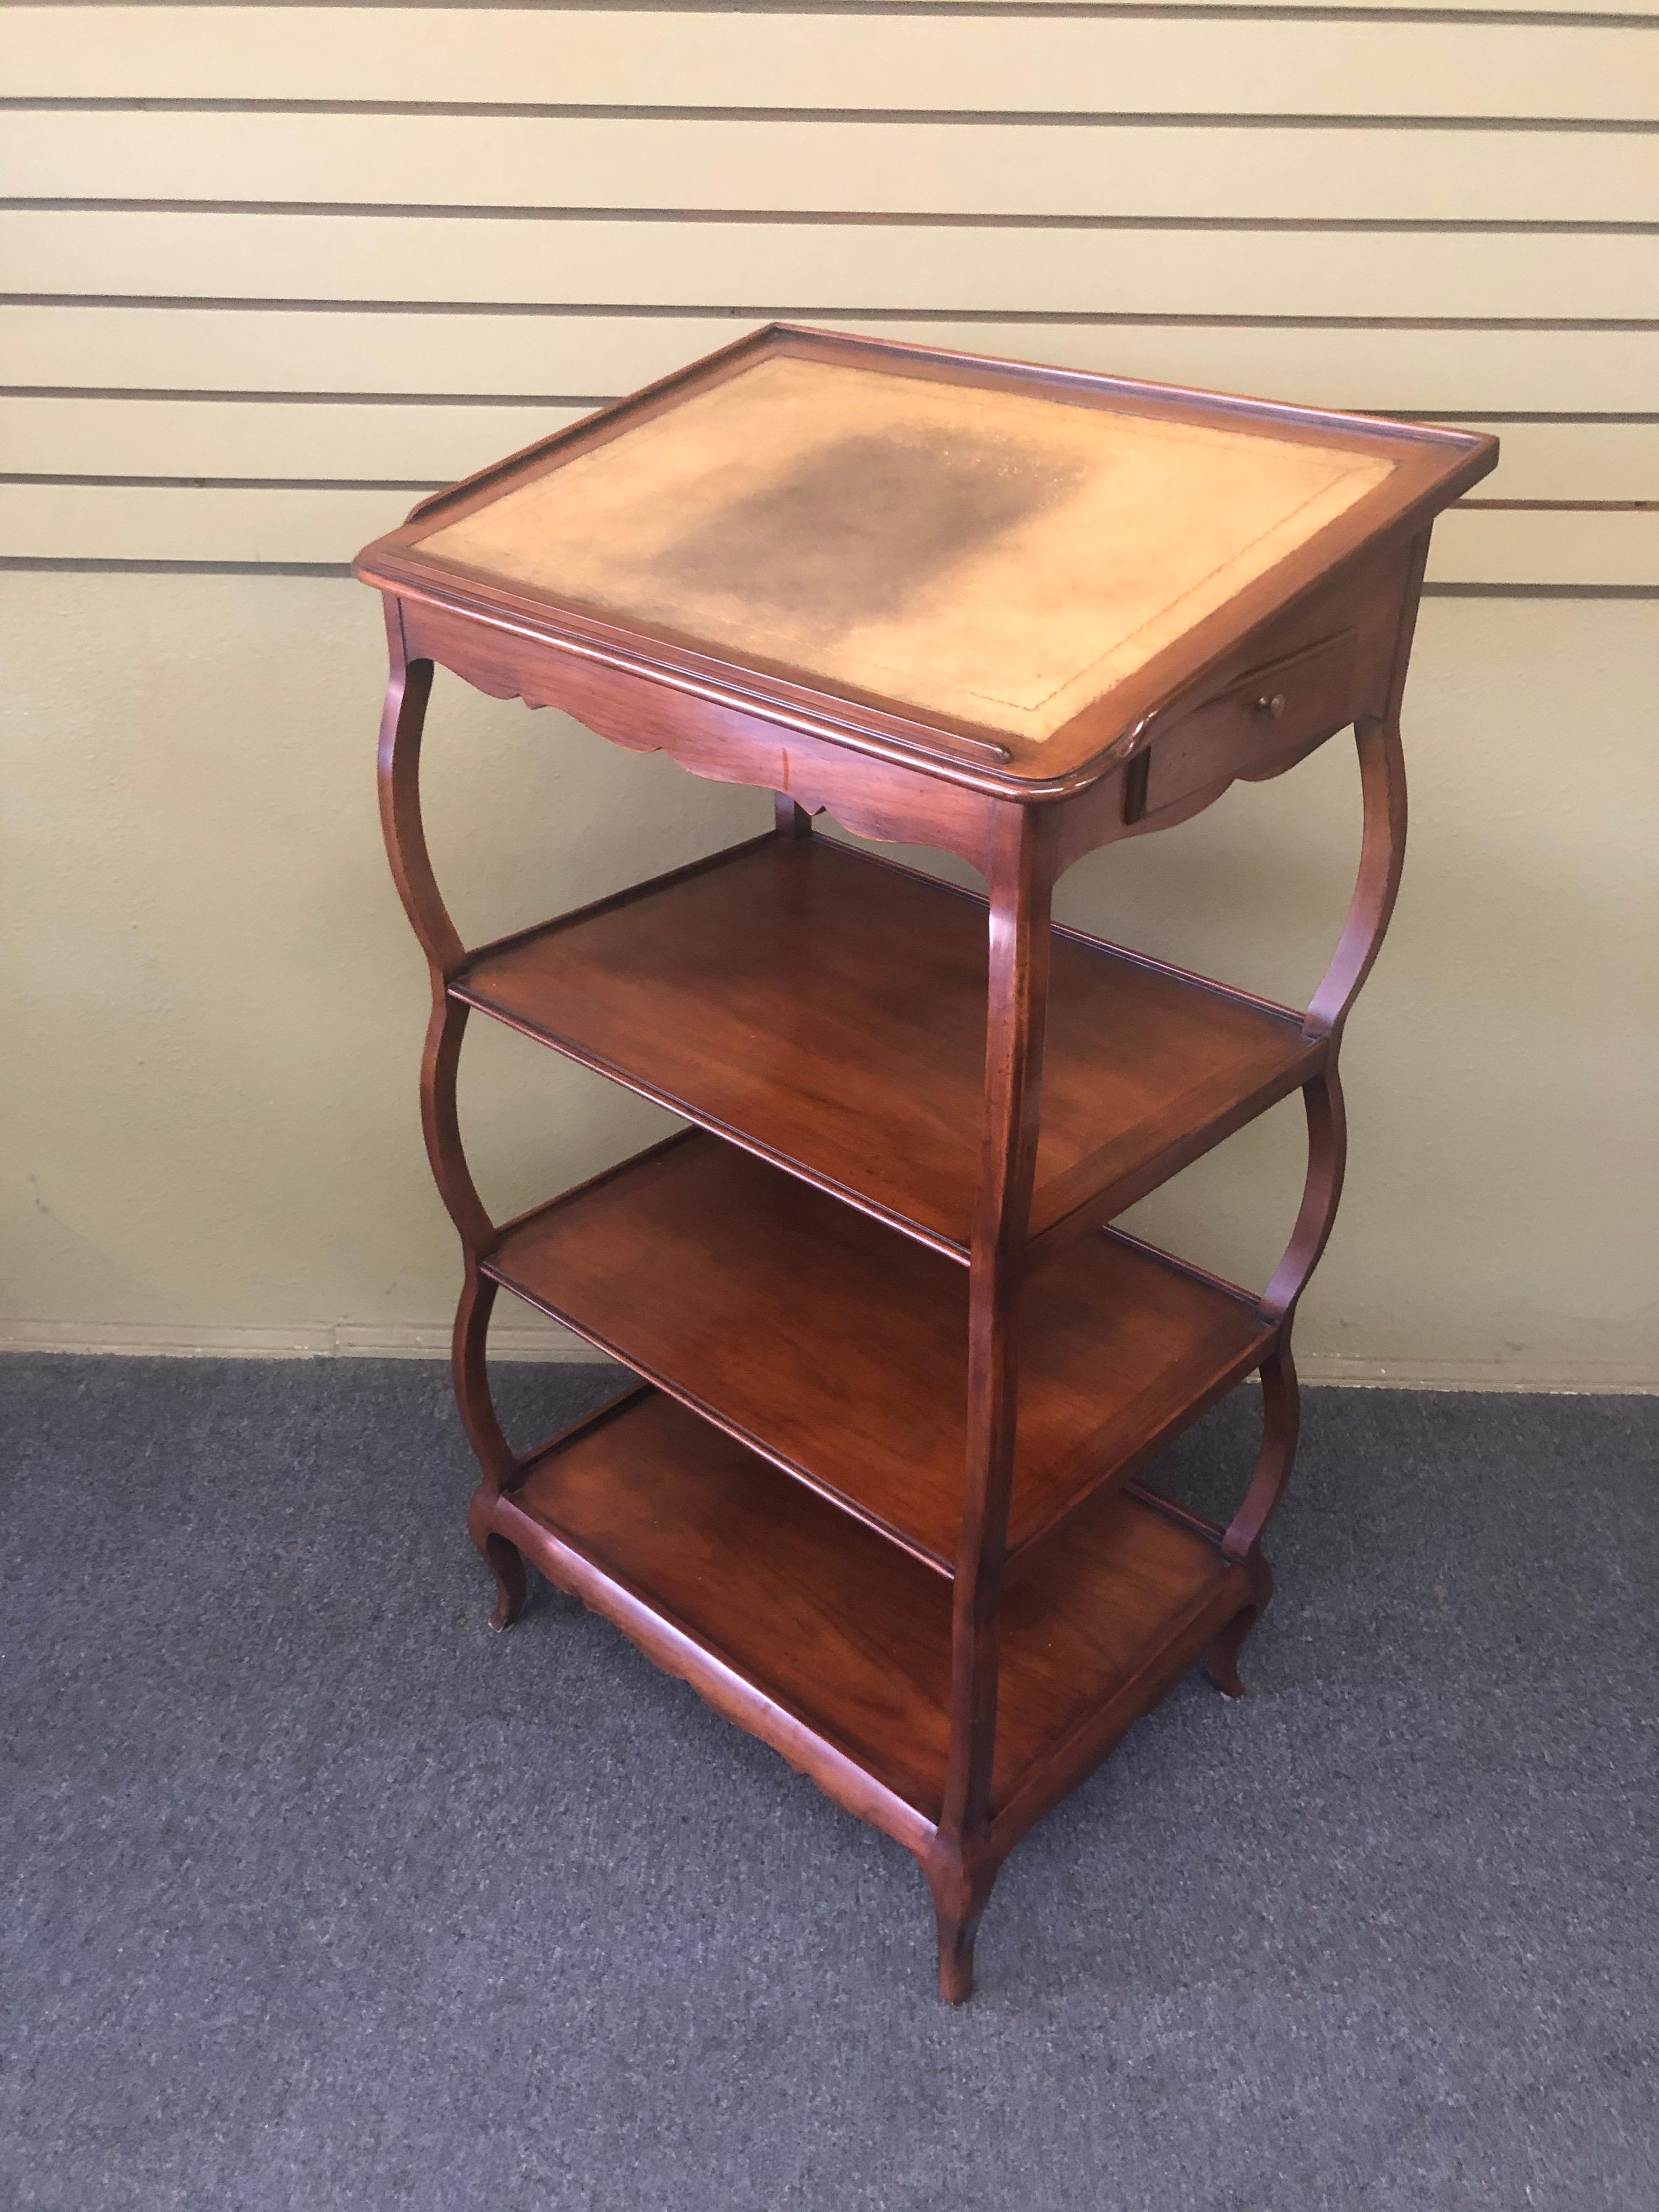 Vintage mahogany lecturn with side drawer and three shelves by Baker Furniture Company, circa 1980s. Avery attractive and functional piece! #1271.